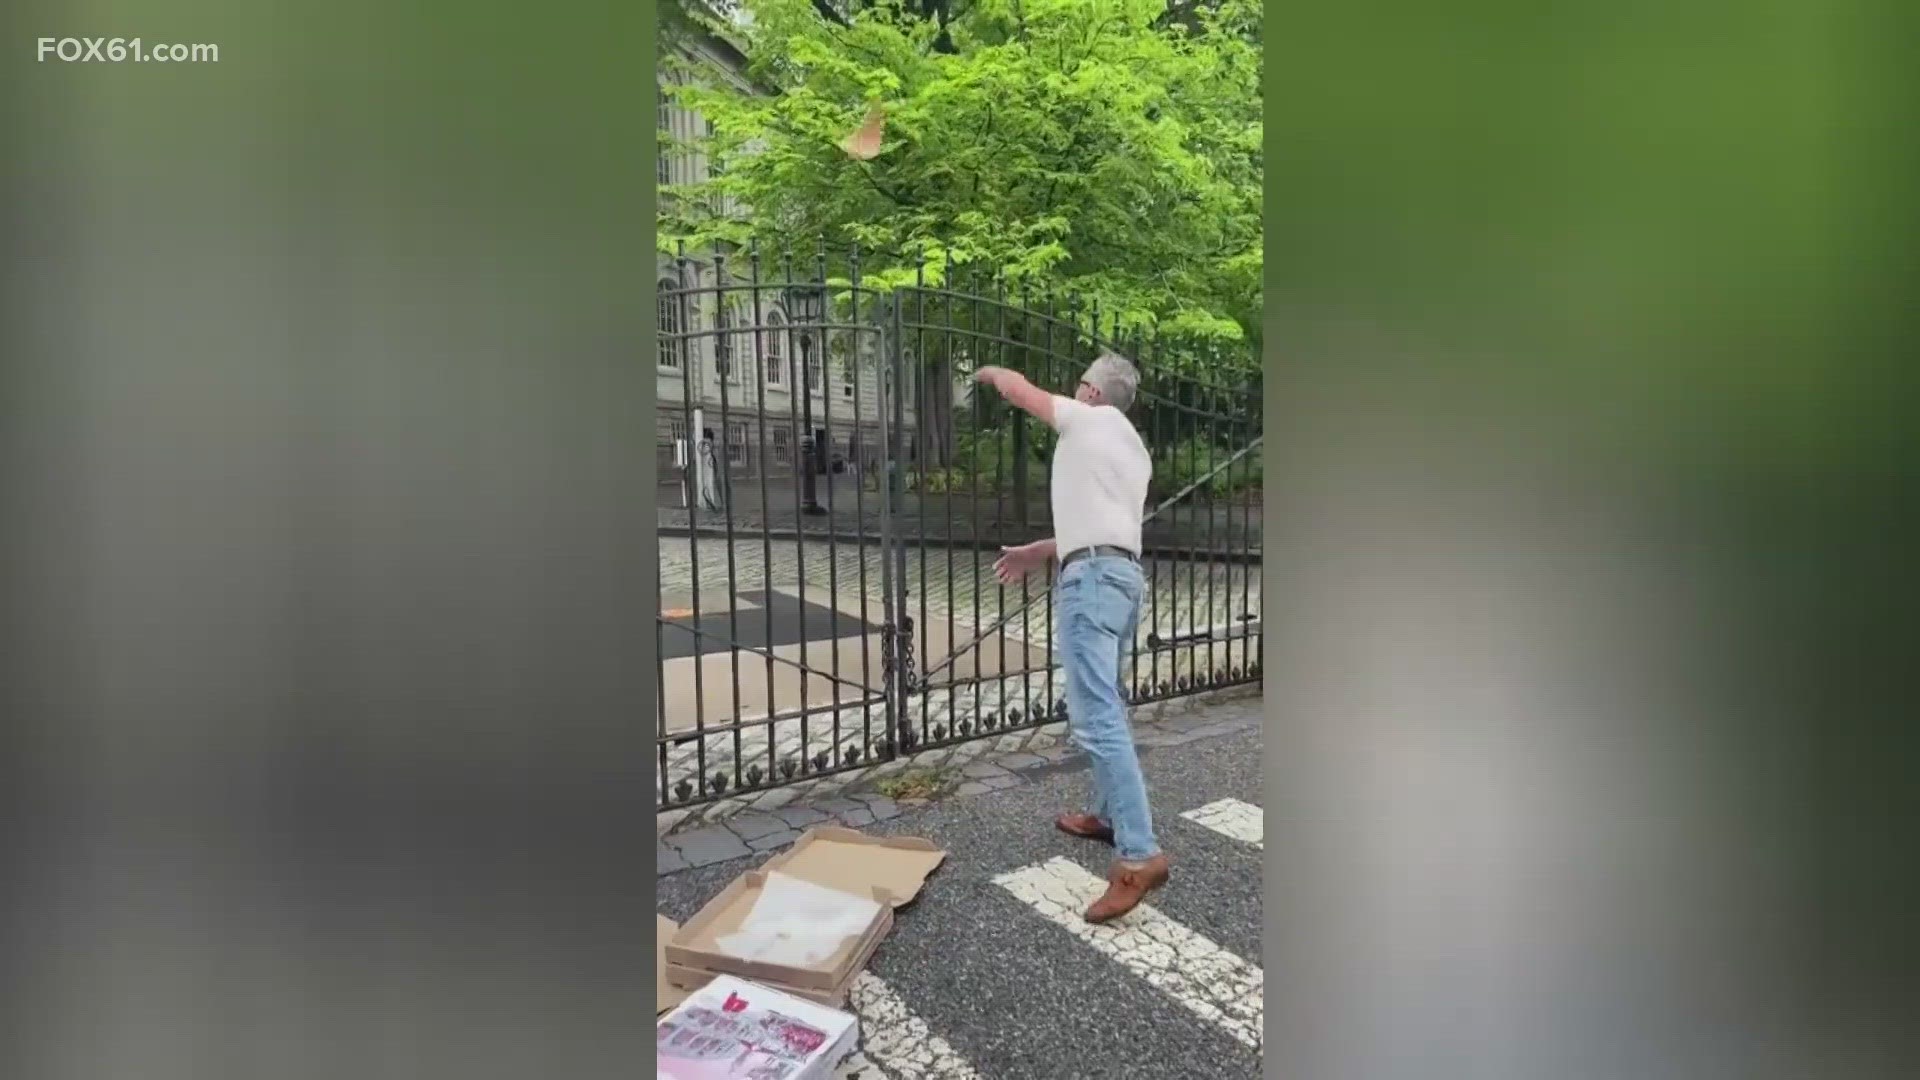 The man shouted "Give us pizza or give us death," as he threw slices over the gate.